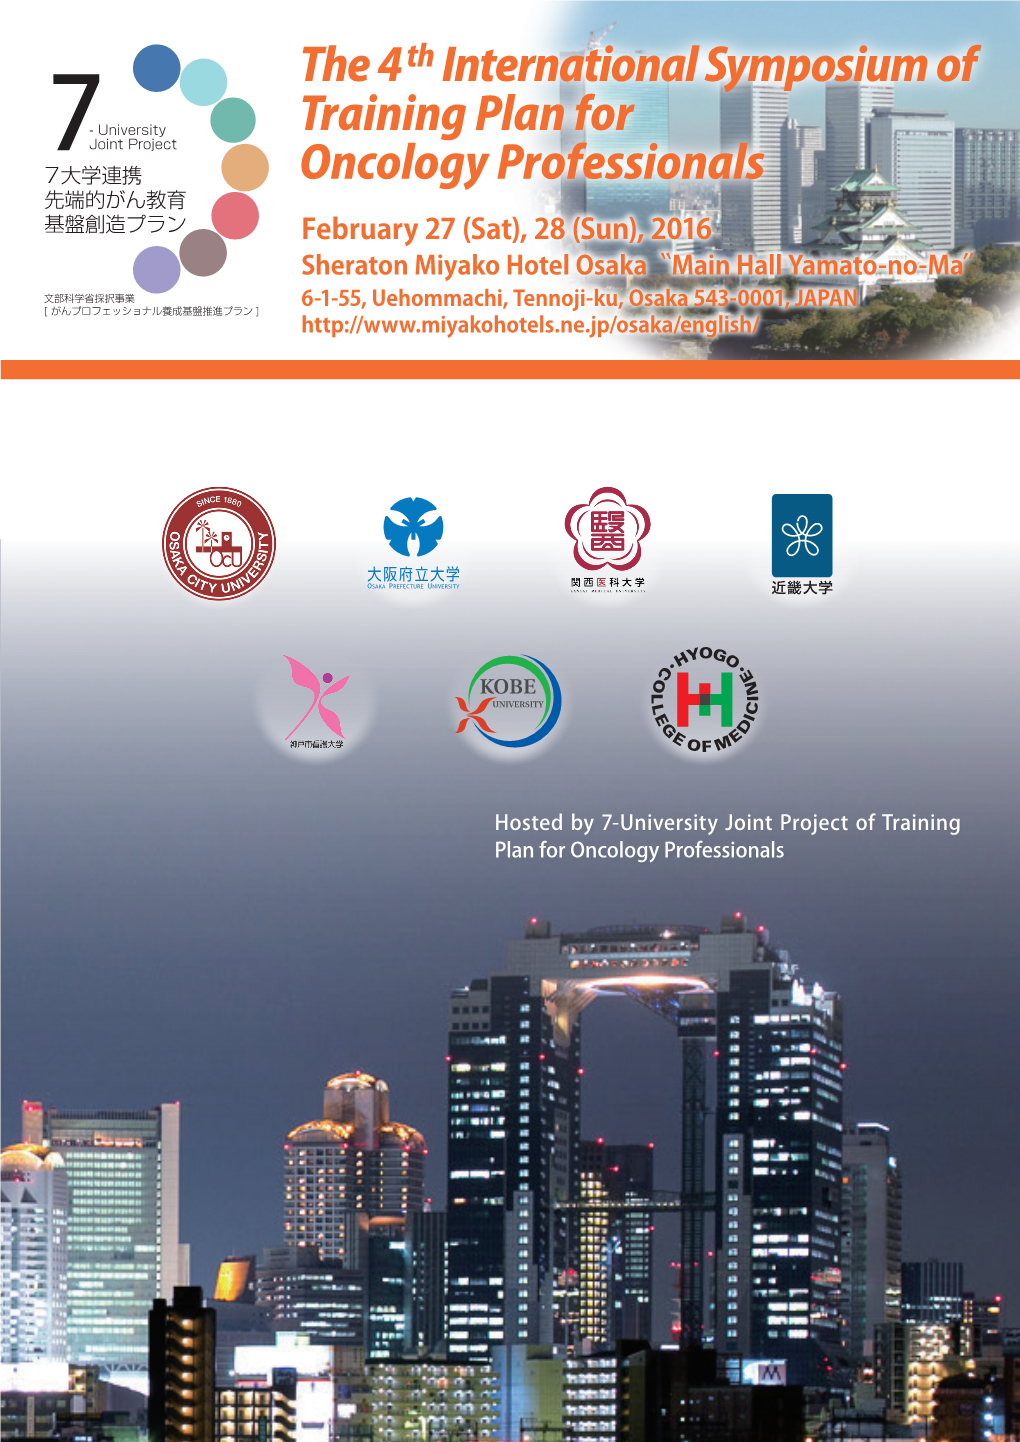 The 4Th International Symposium of Training Plan for Oncology Professionals